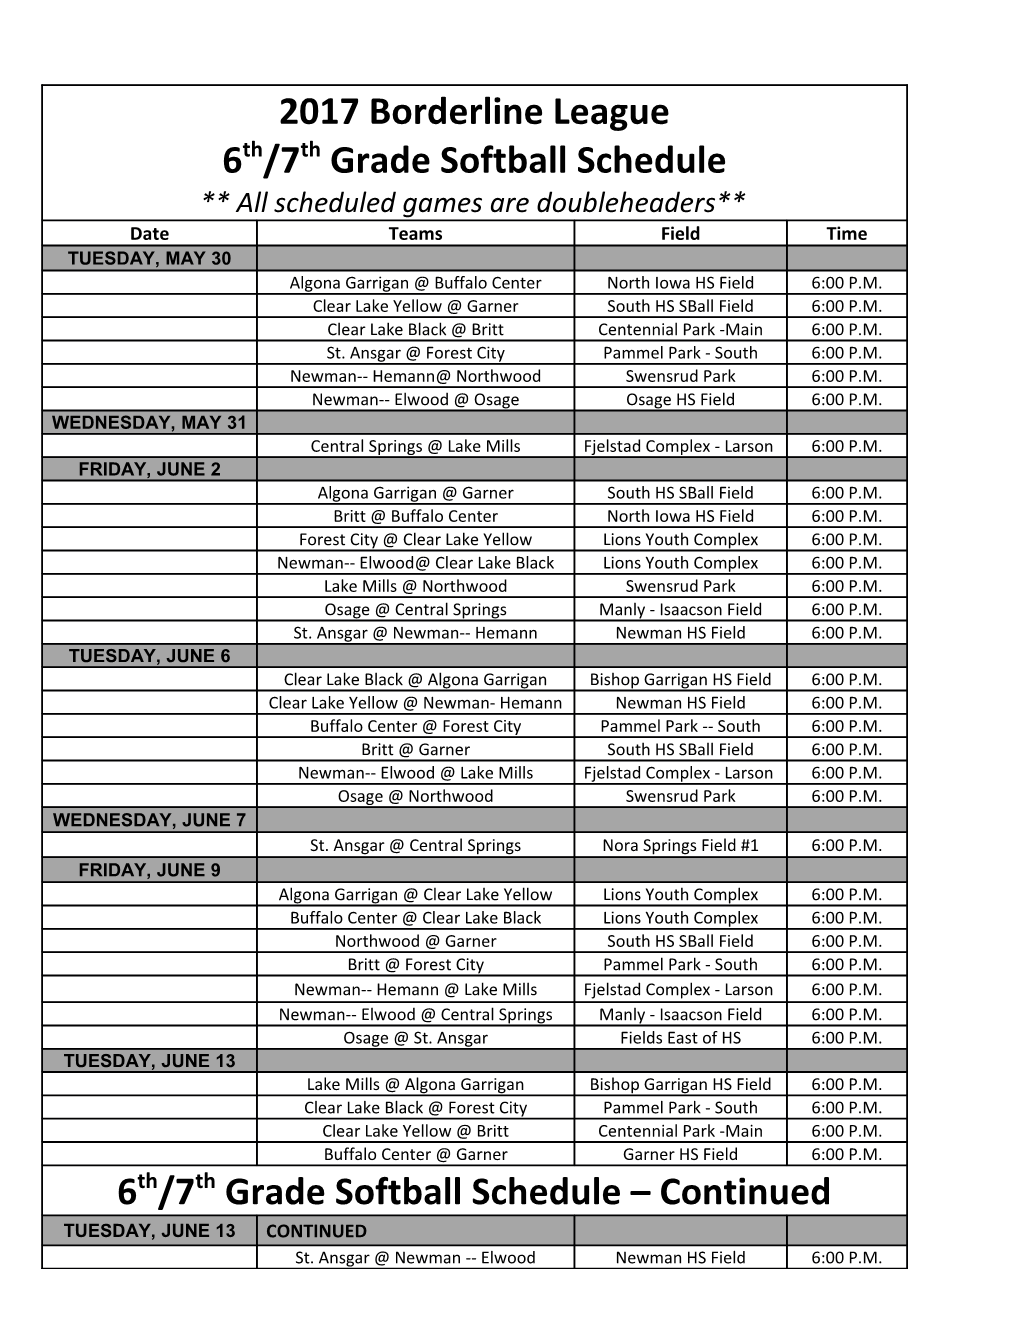 6Th/7Th Grade Softball Schedule Continued